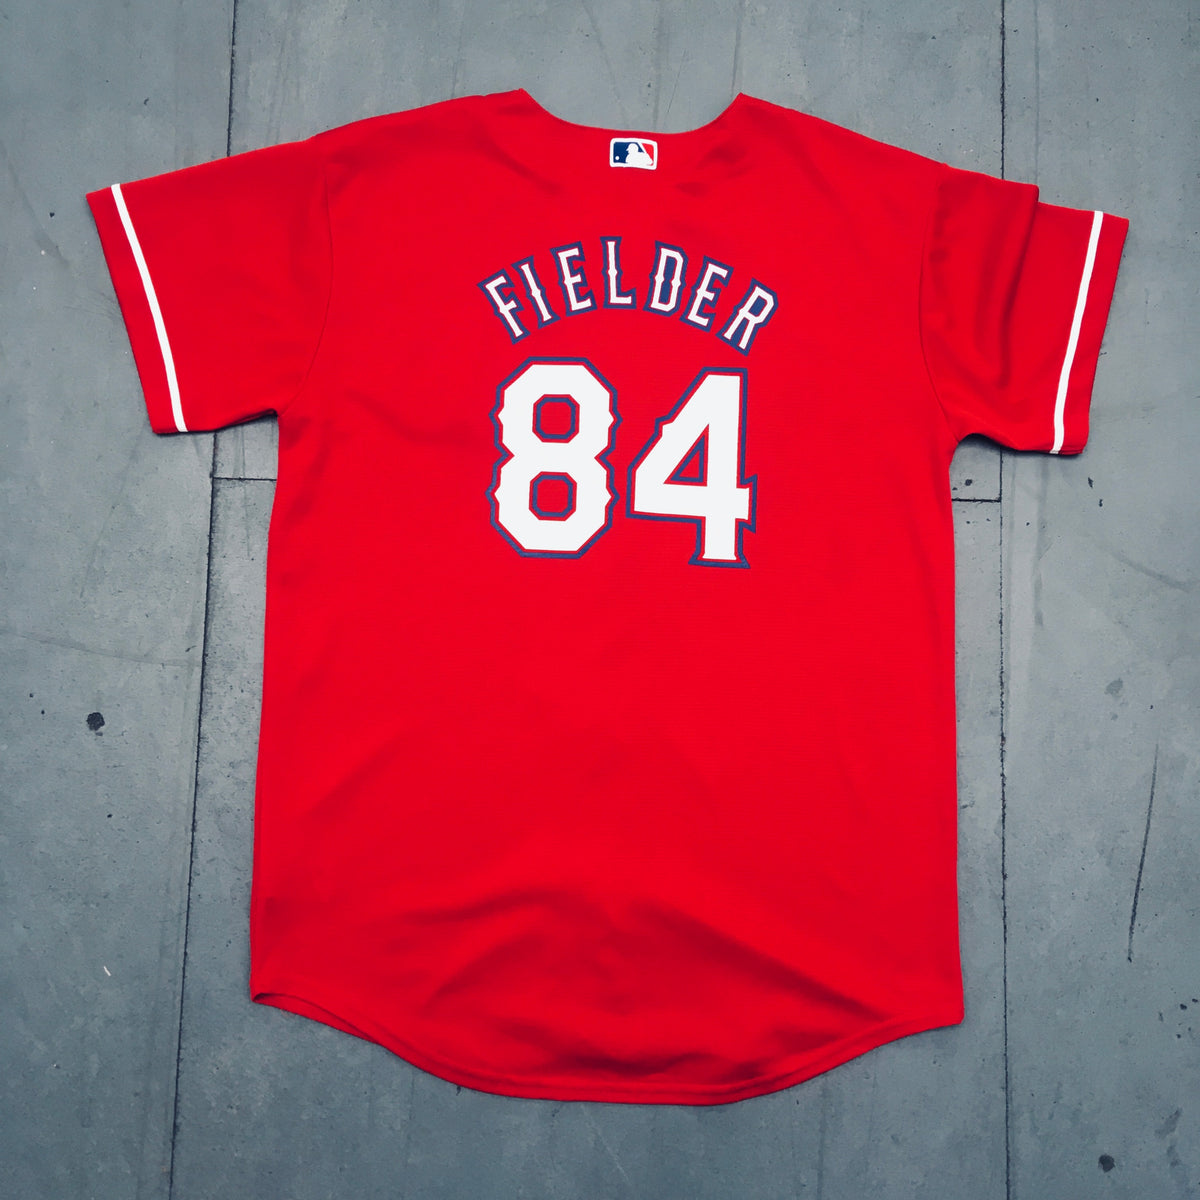  Prince Fielder Texas Rangers #84 Red Youth Player Fashion Jersey  (Medium 8/10) : Sports & Outdoors